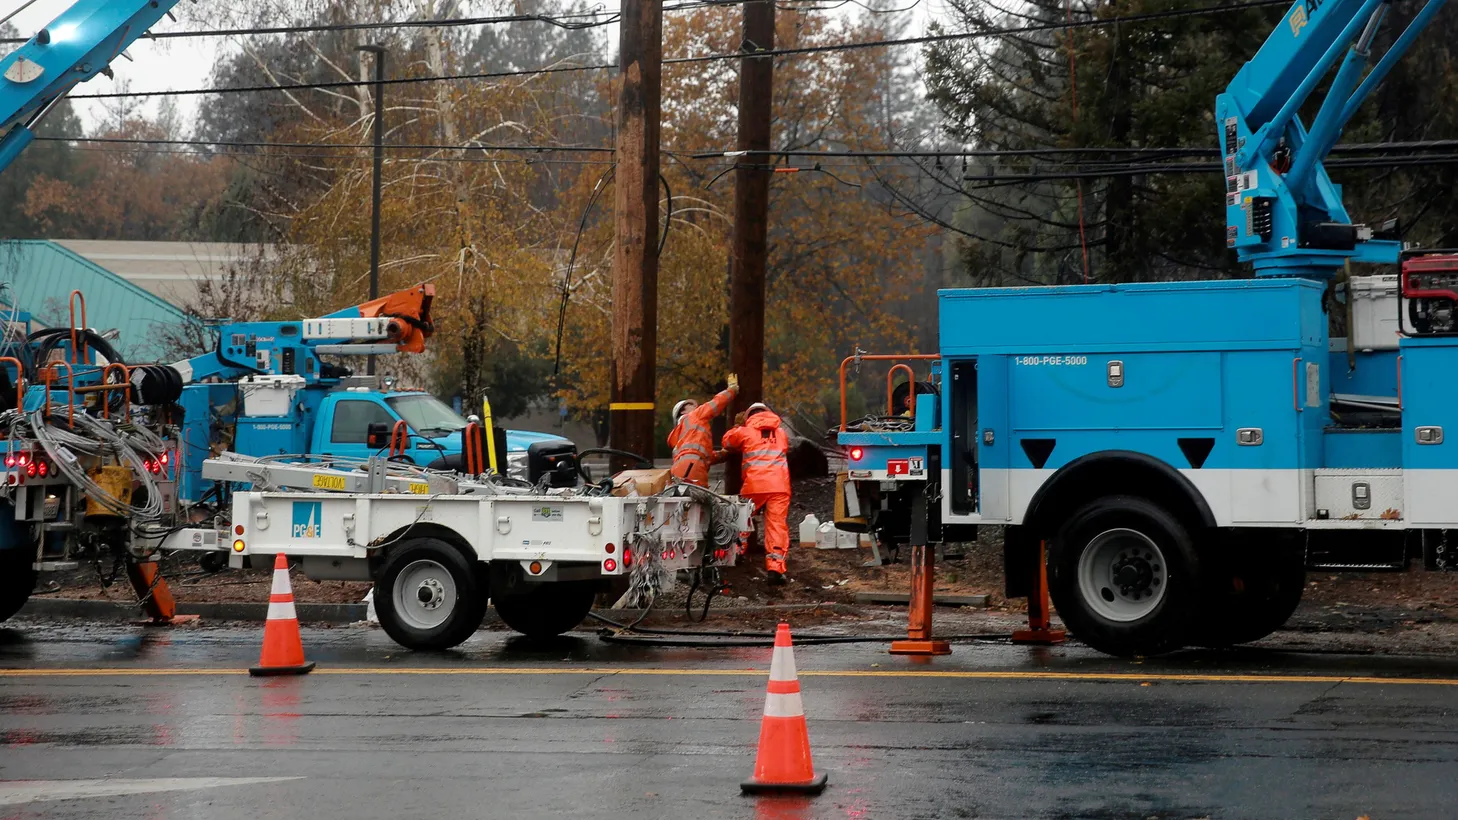 PG&E crew members work on power lines to repair damage caused by the Camp Fire in Paradise, California, November 21, 2018.